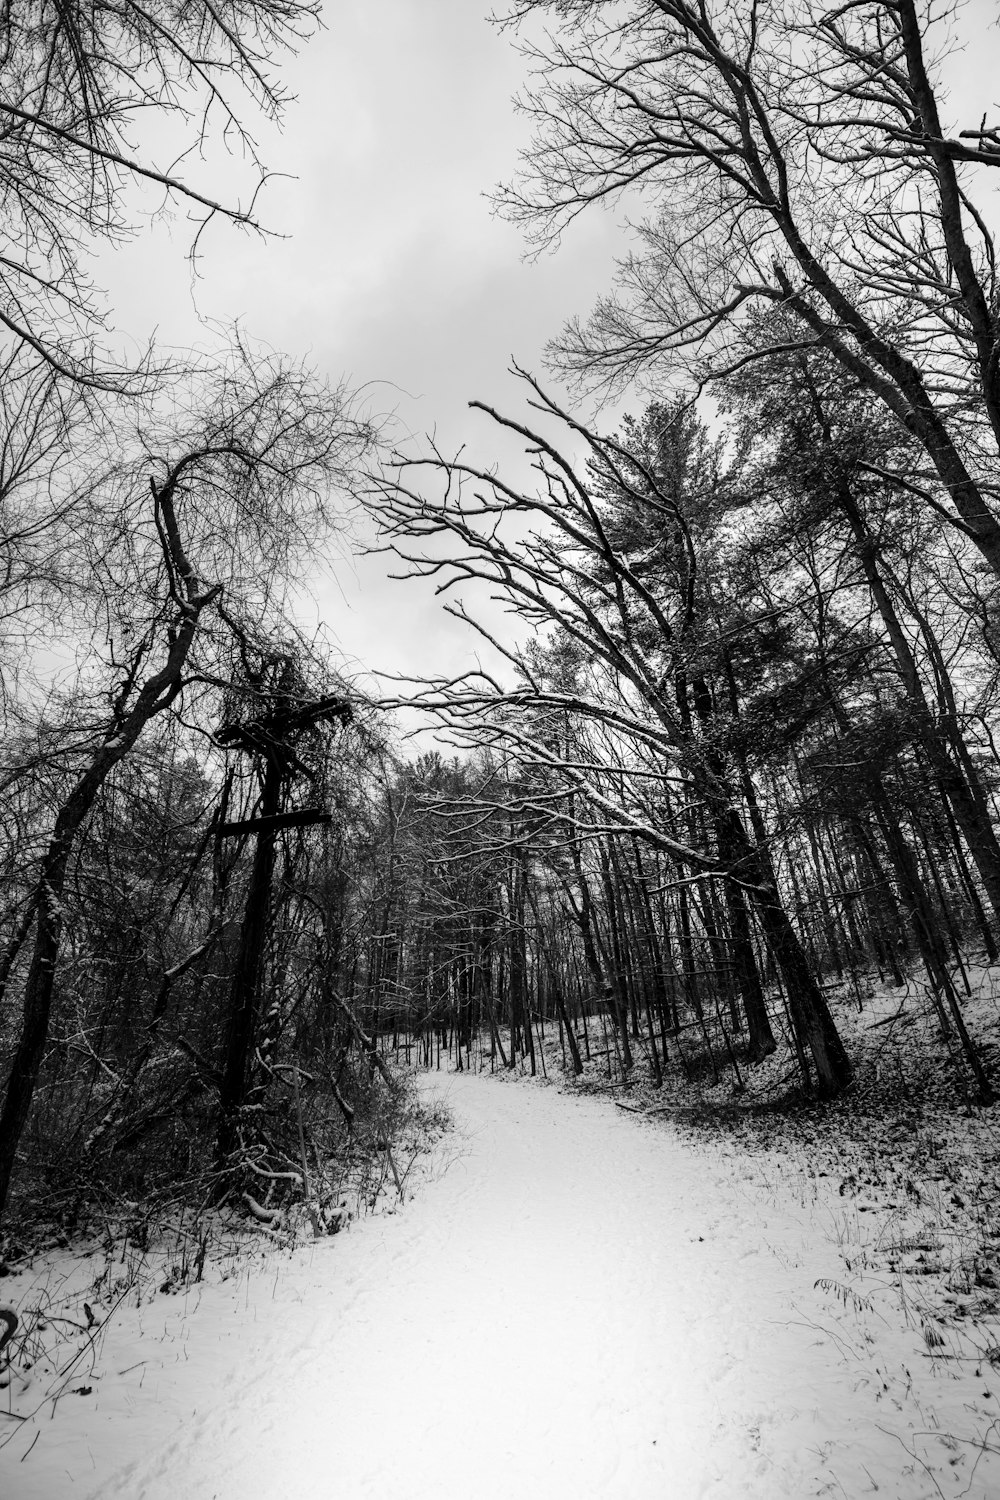 a snow covered path through a forest filled with trees